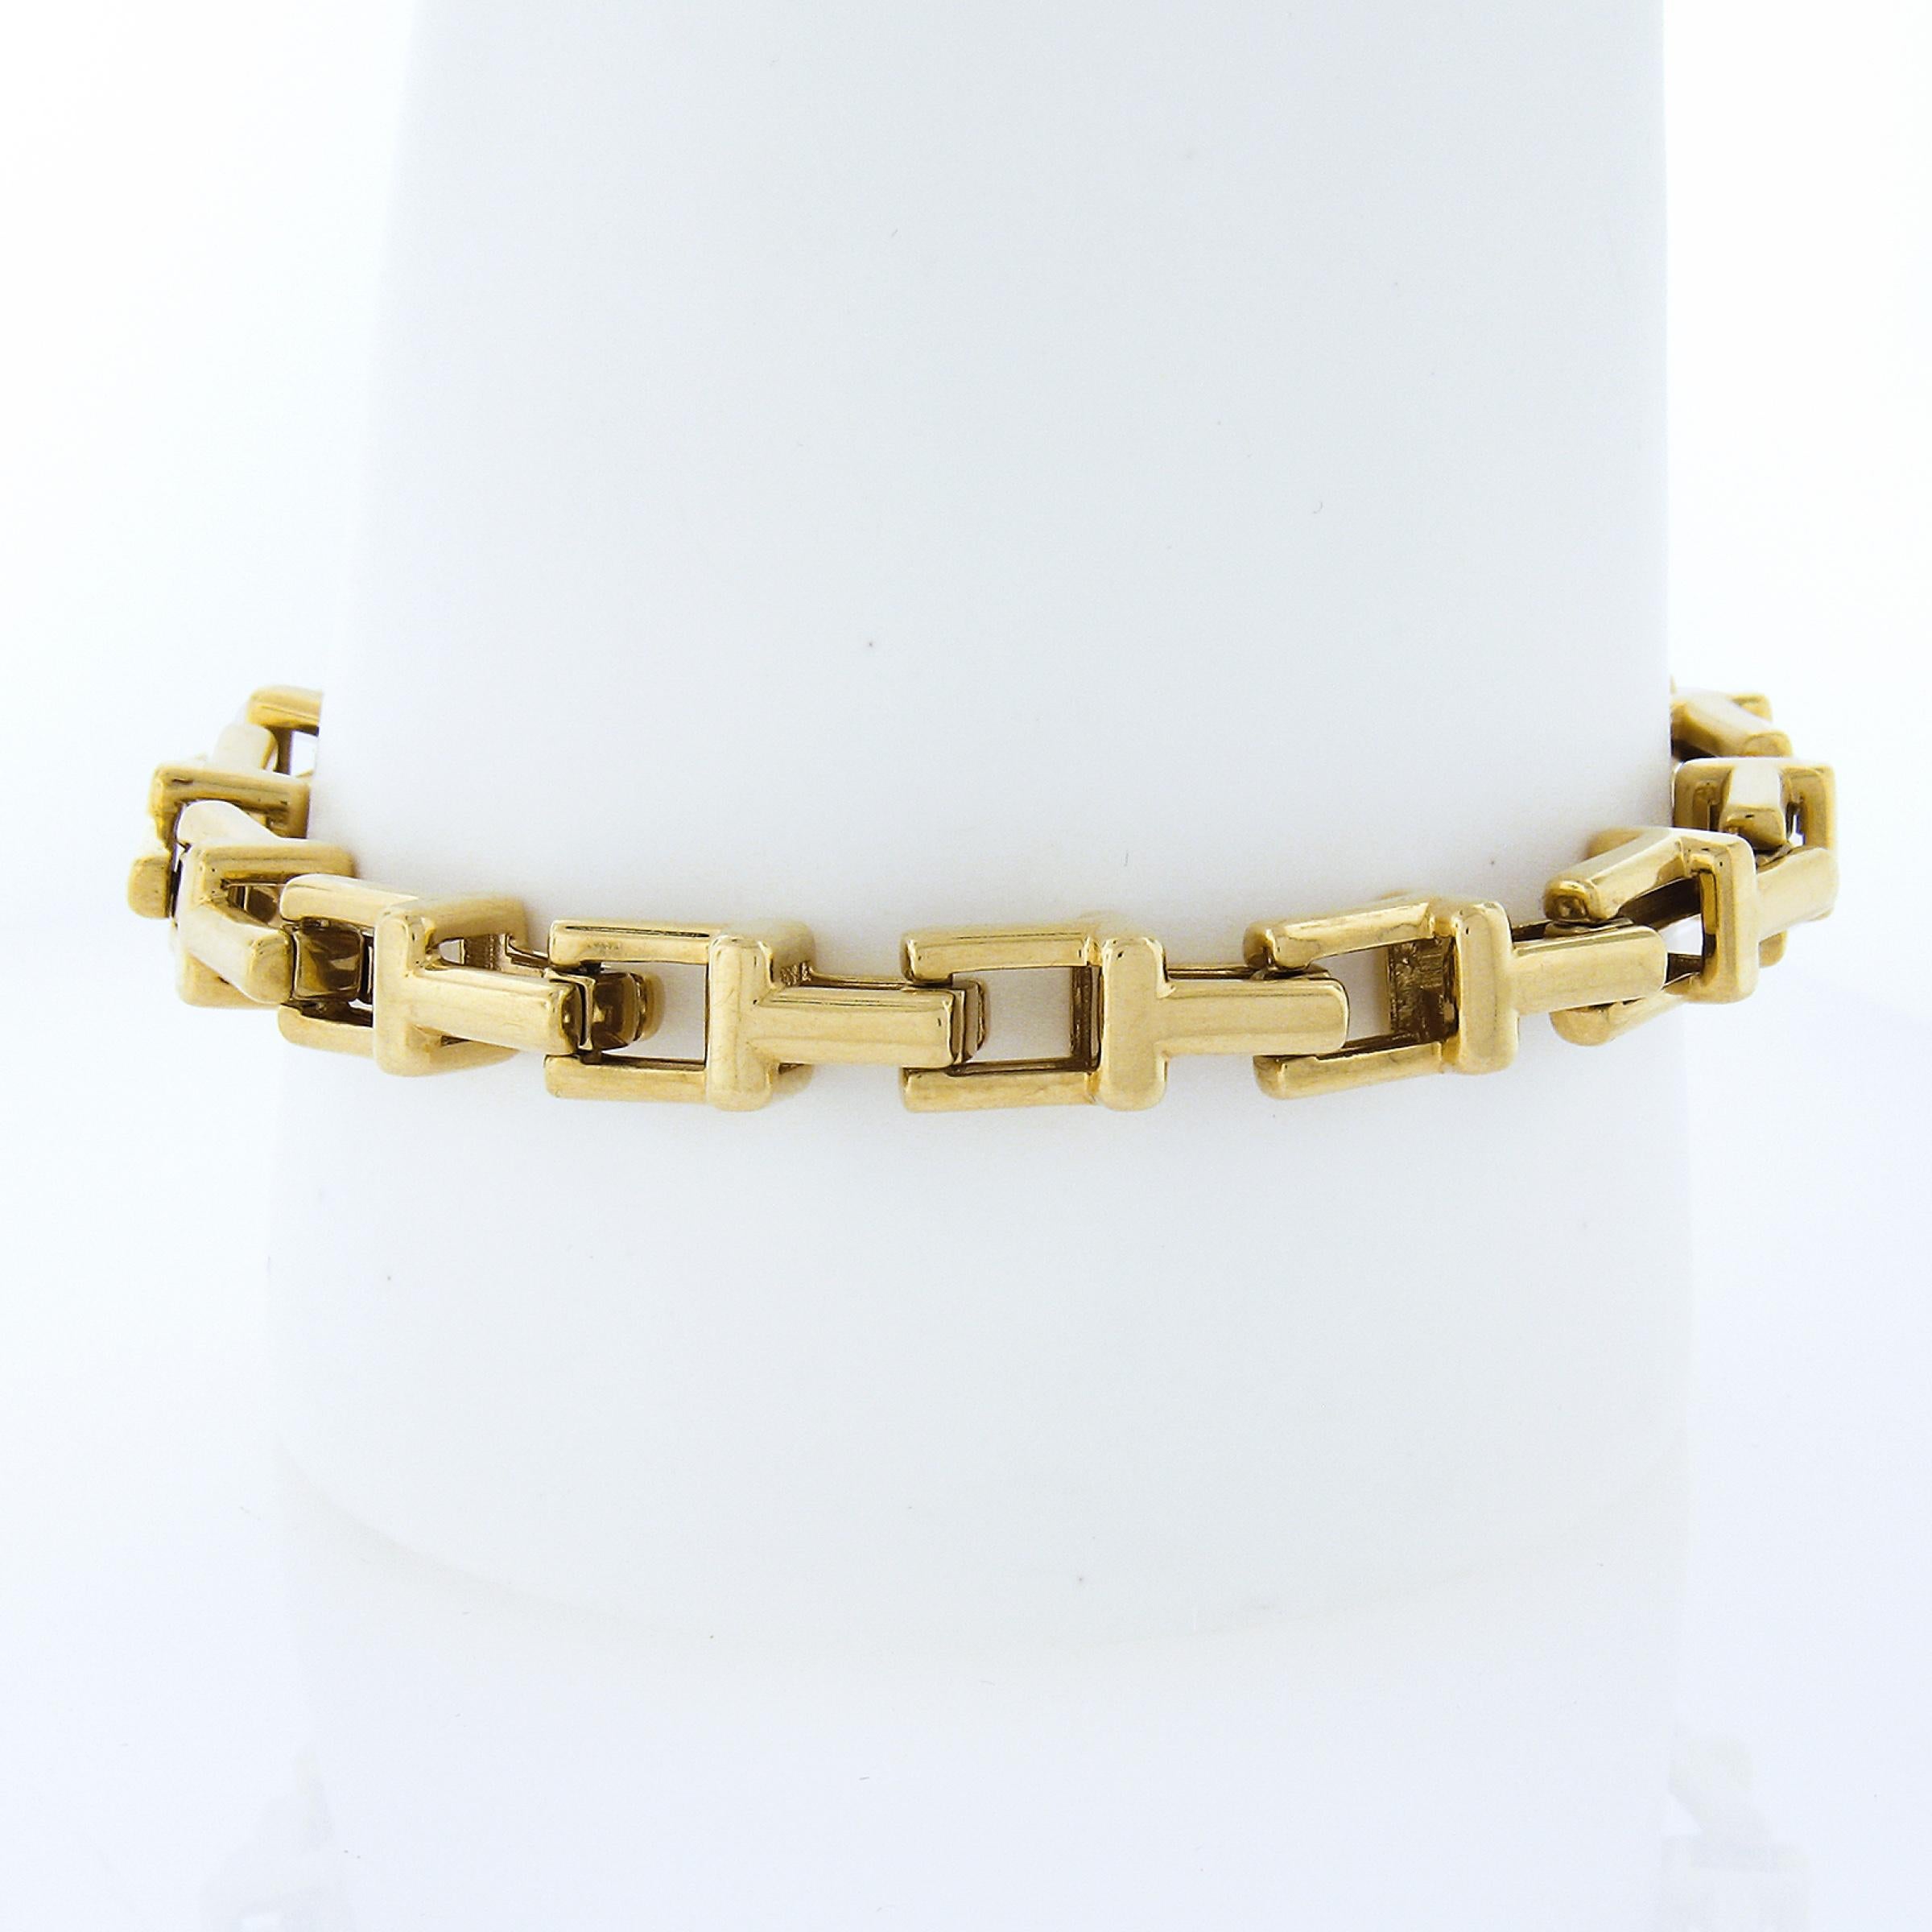 This stunning and bold Tiffany & Co. chain bracelet is crafted in solid 18k yellow gold. This rare 7mm wide bracelet features the iconic T link design that interlocks and flows smoothly throughout. An absolute statement piece from Tiffany & Co. that